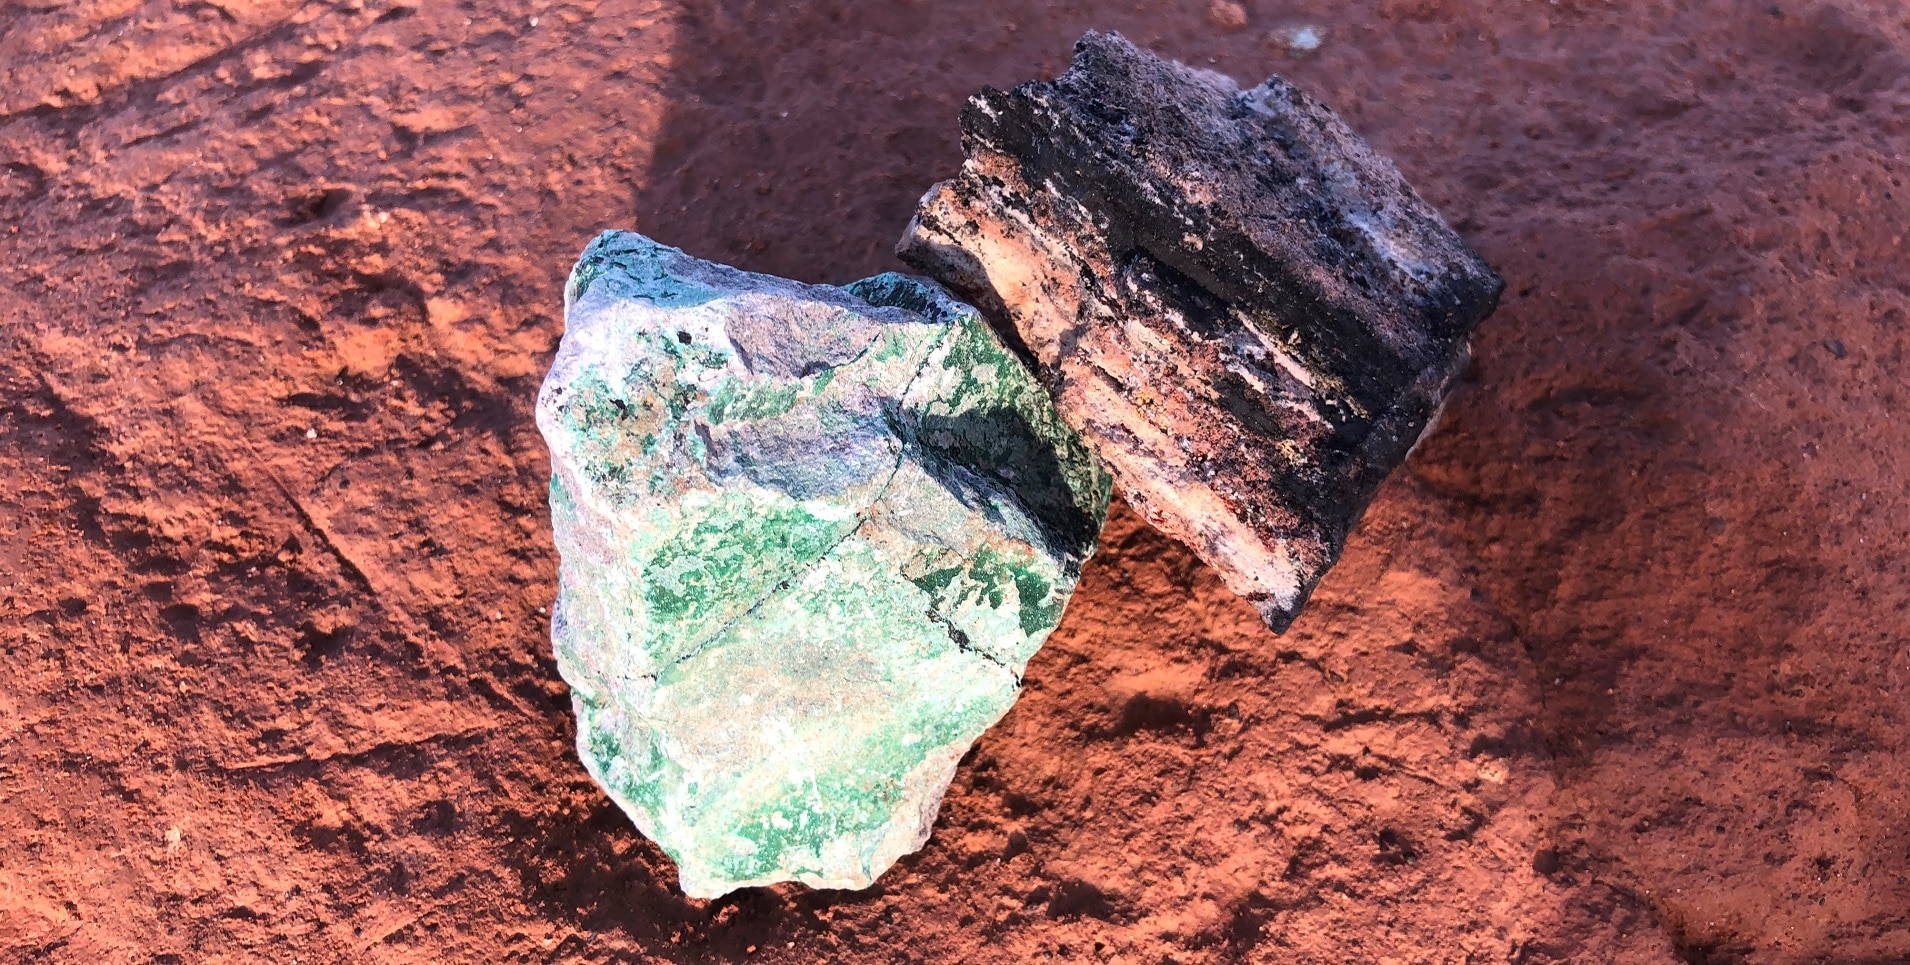  A black piece of cobalt and a green piece of copper placed on the ochre soil to symbolise the mining industry in the Democratic Republic of the Congo’s Copperbelt region.